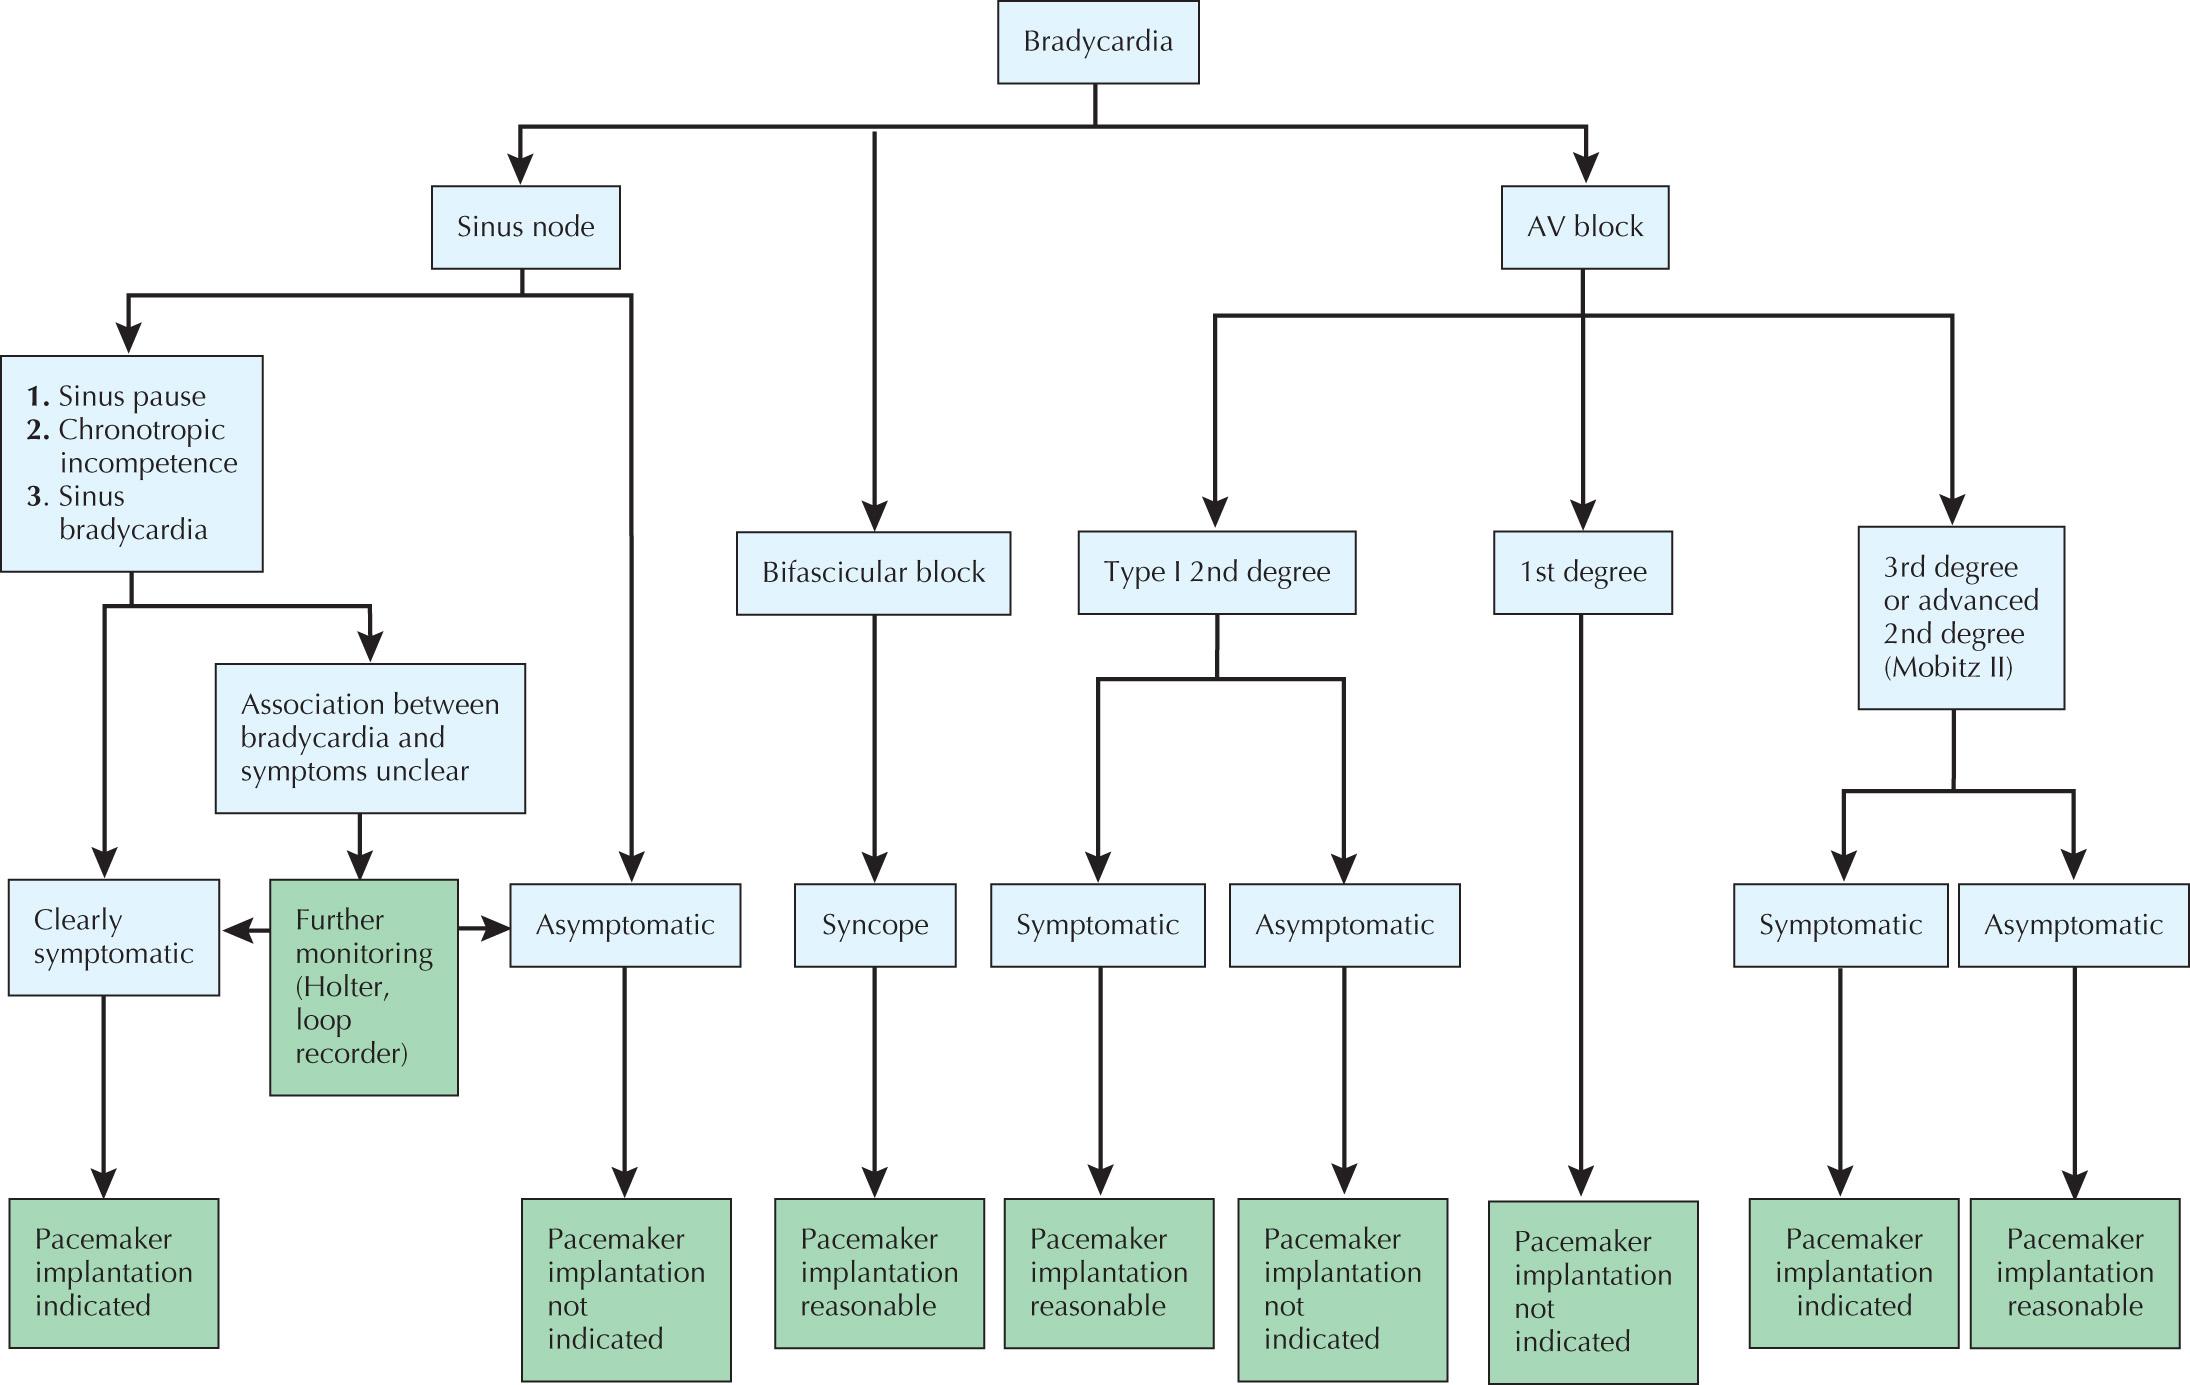 FIG 44.1, Algorithm Detailing Evaluation of Patients With Bradycardia and Indications for Pacemaker Implantation.